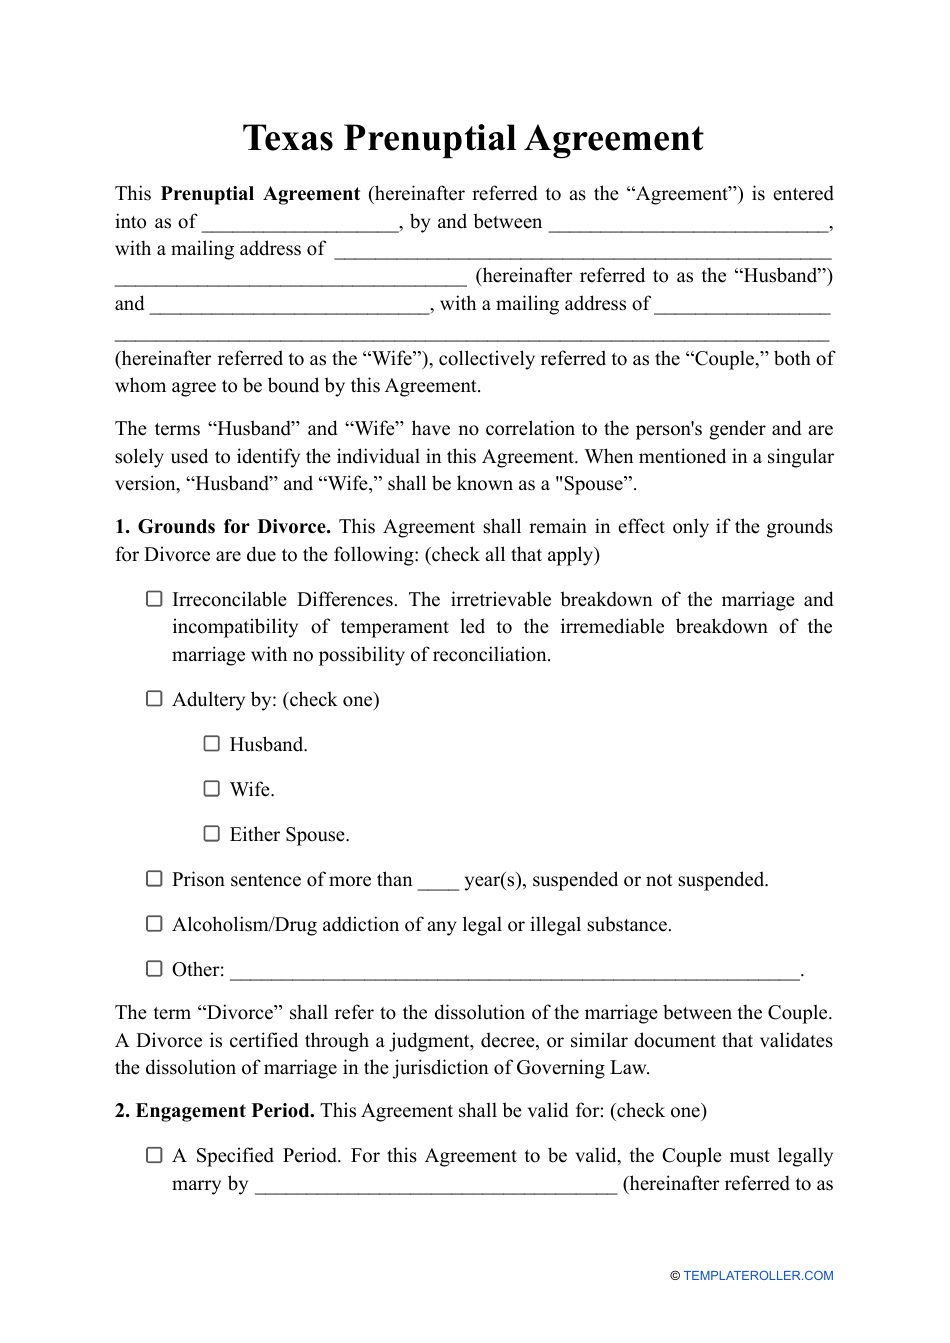 Texas Prenuptial Agreement Template Fill Out Sign Online and